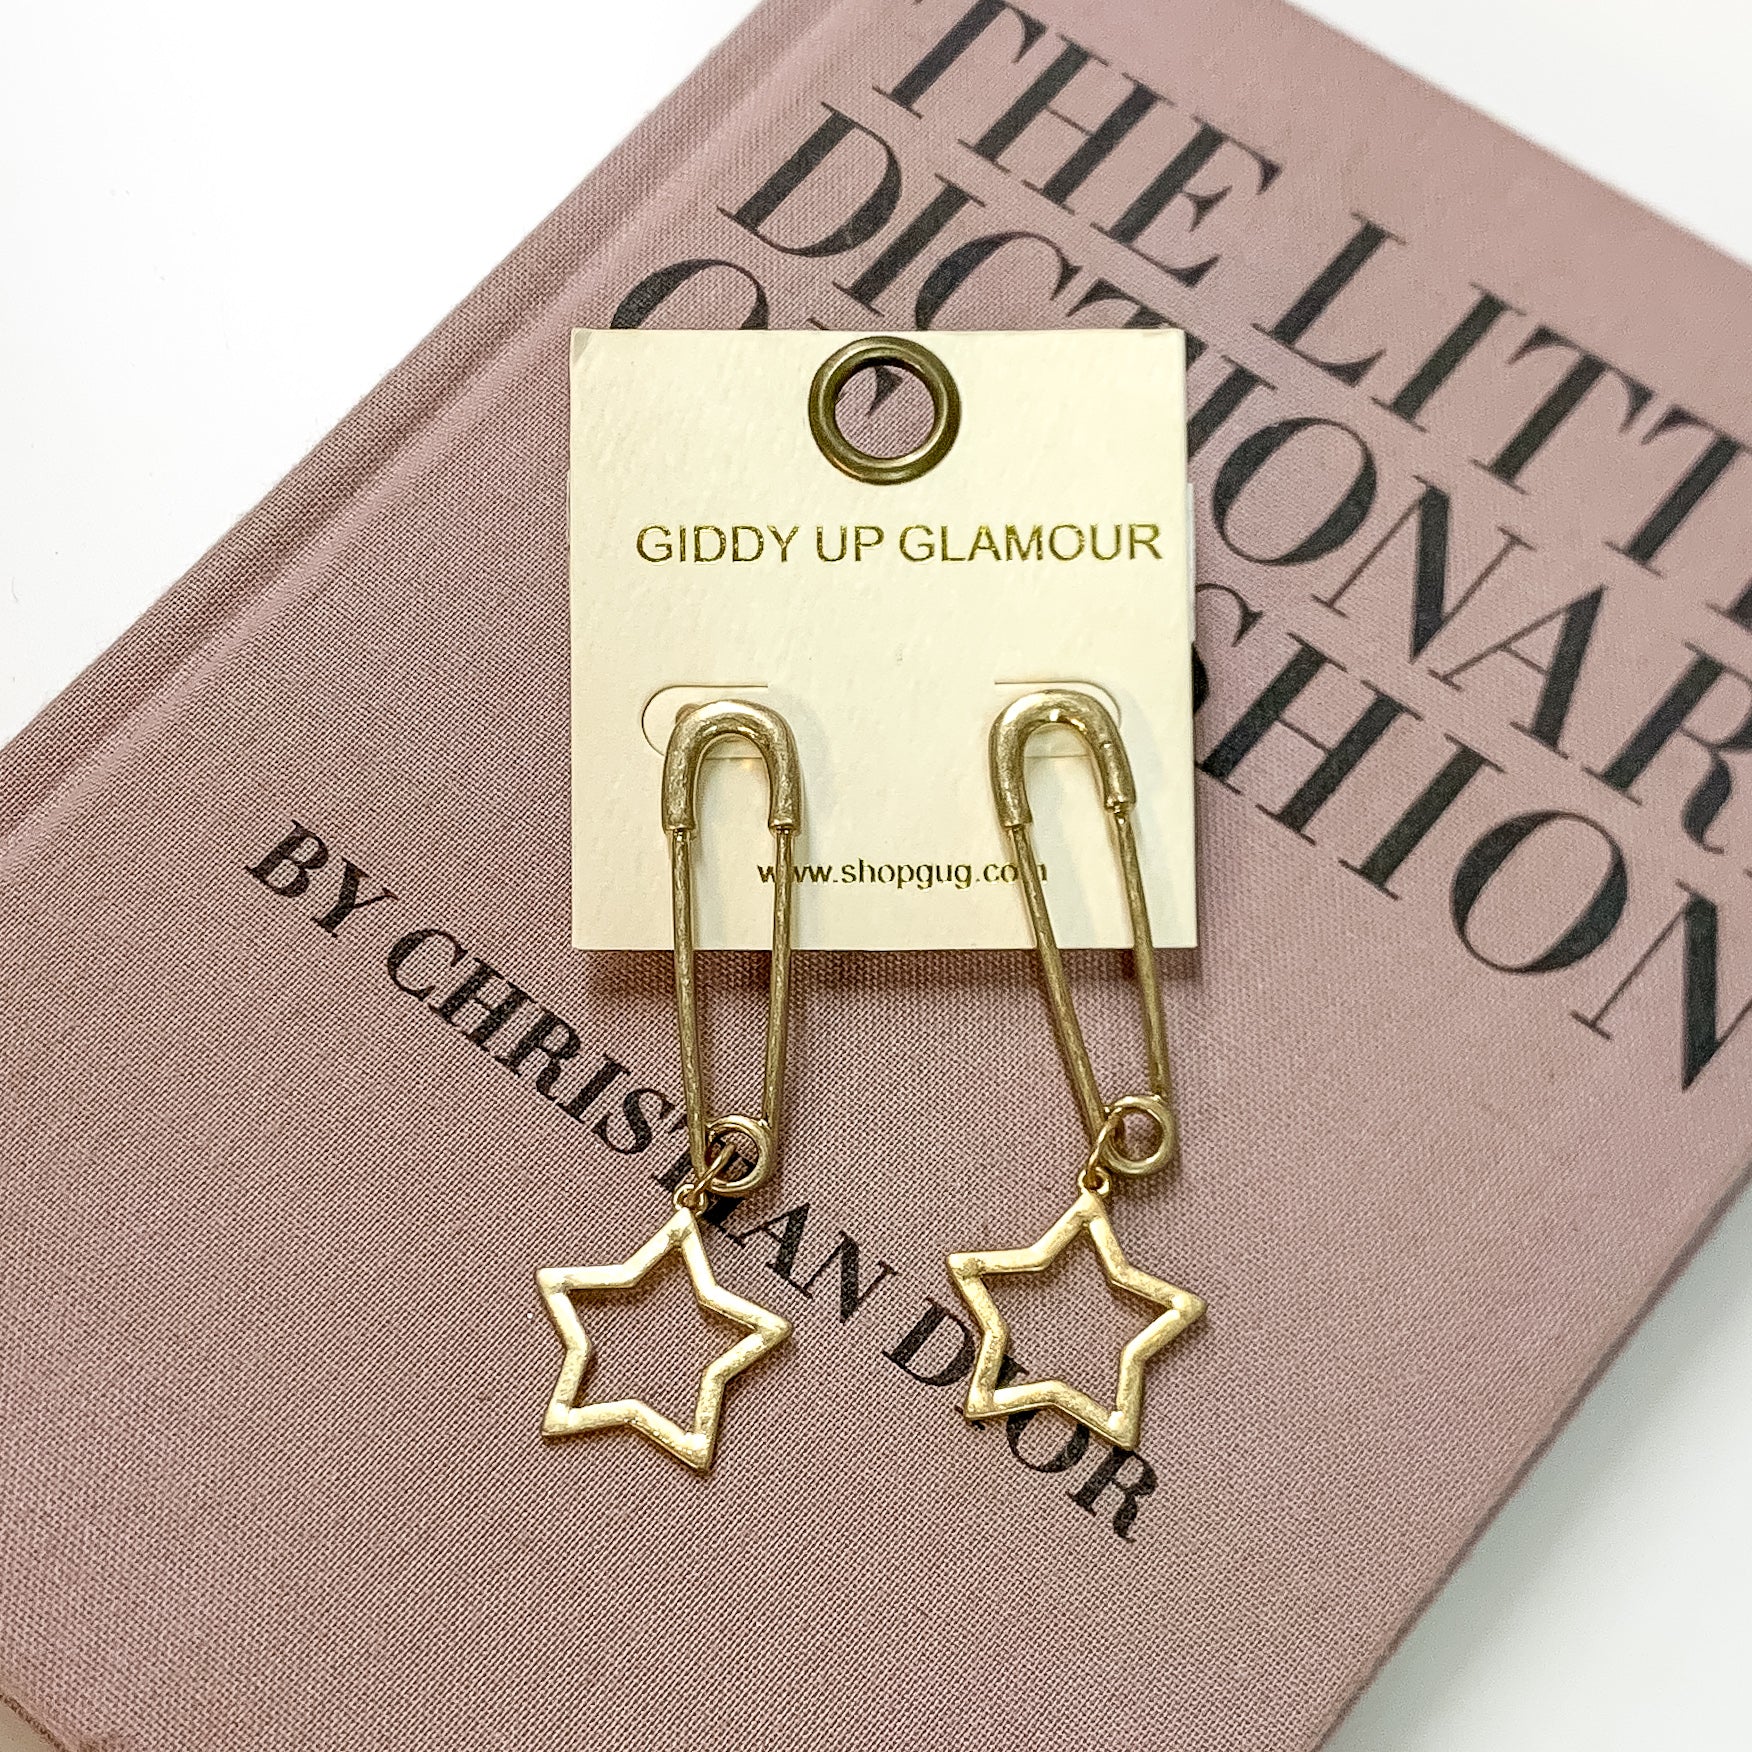 Gold Tone Safety Pin Earrings with Star Charms - Giddy Up Glamour Boutique